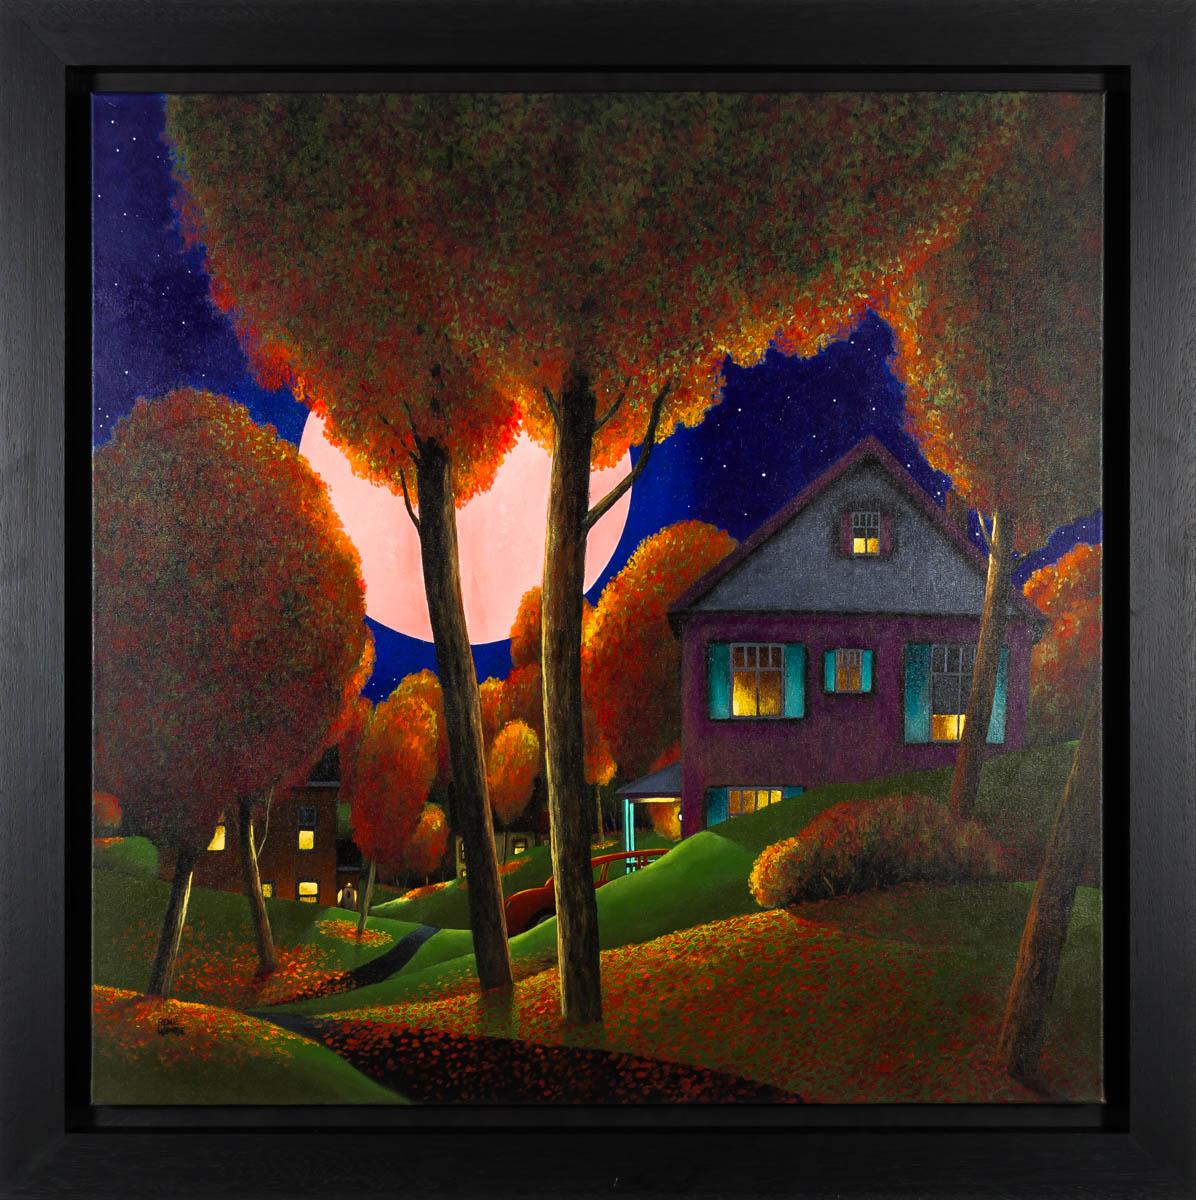 Joy and Beauty of Autumn by Night - Painting by René Lalonde